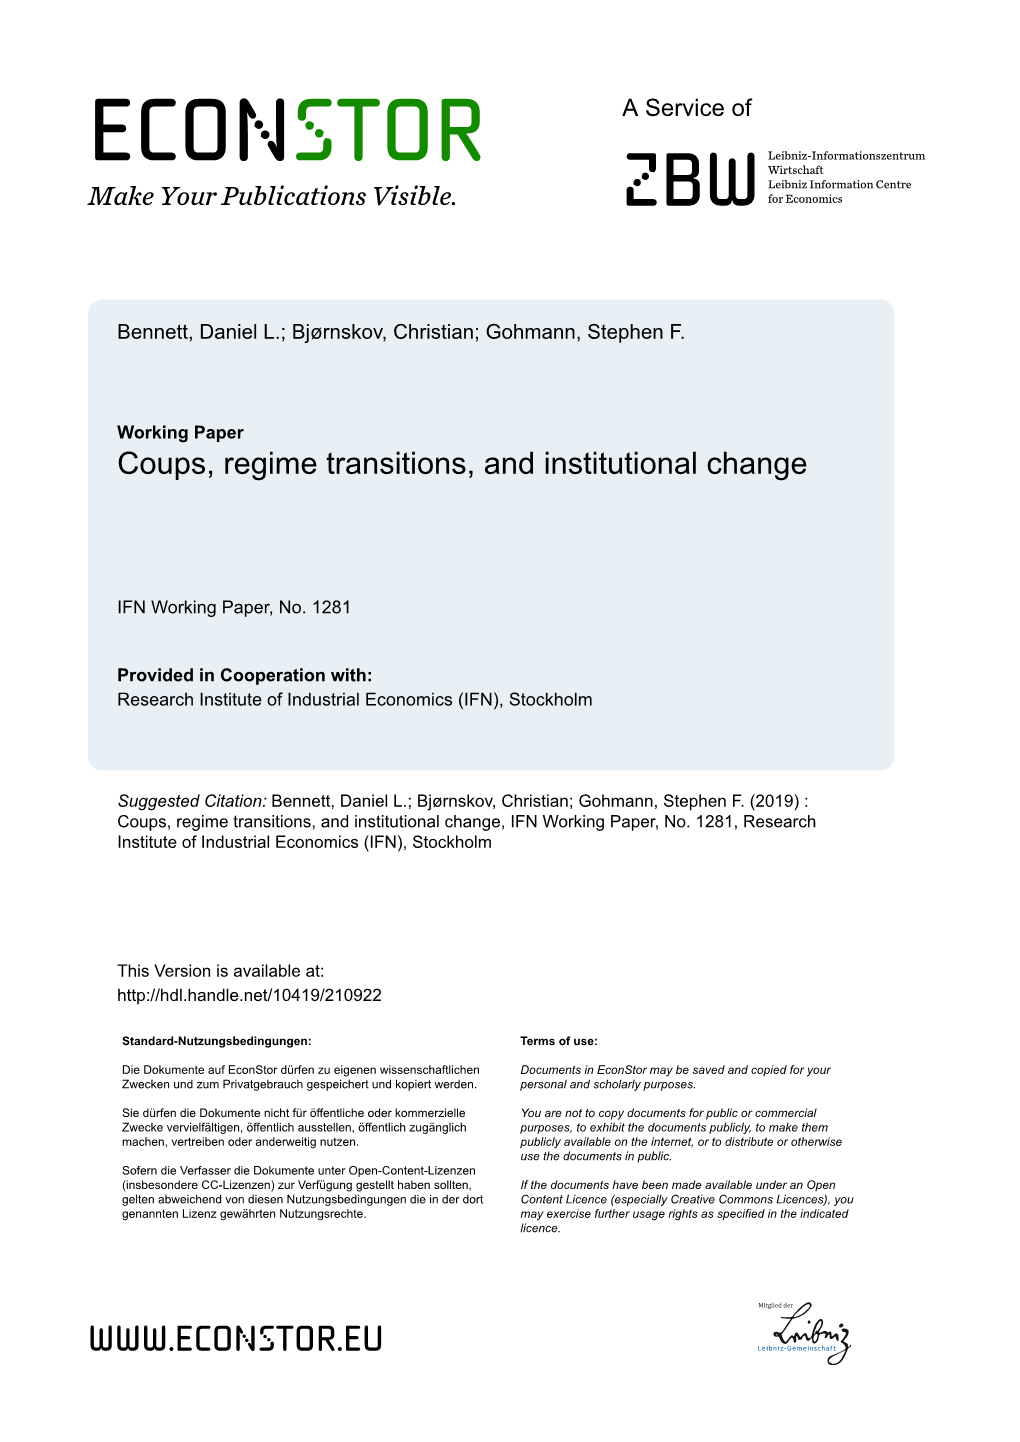 Coups, Regime Transitions, and Institutional Change